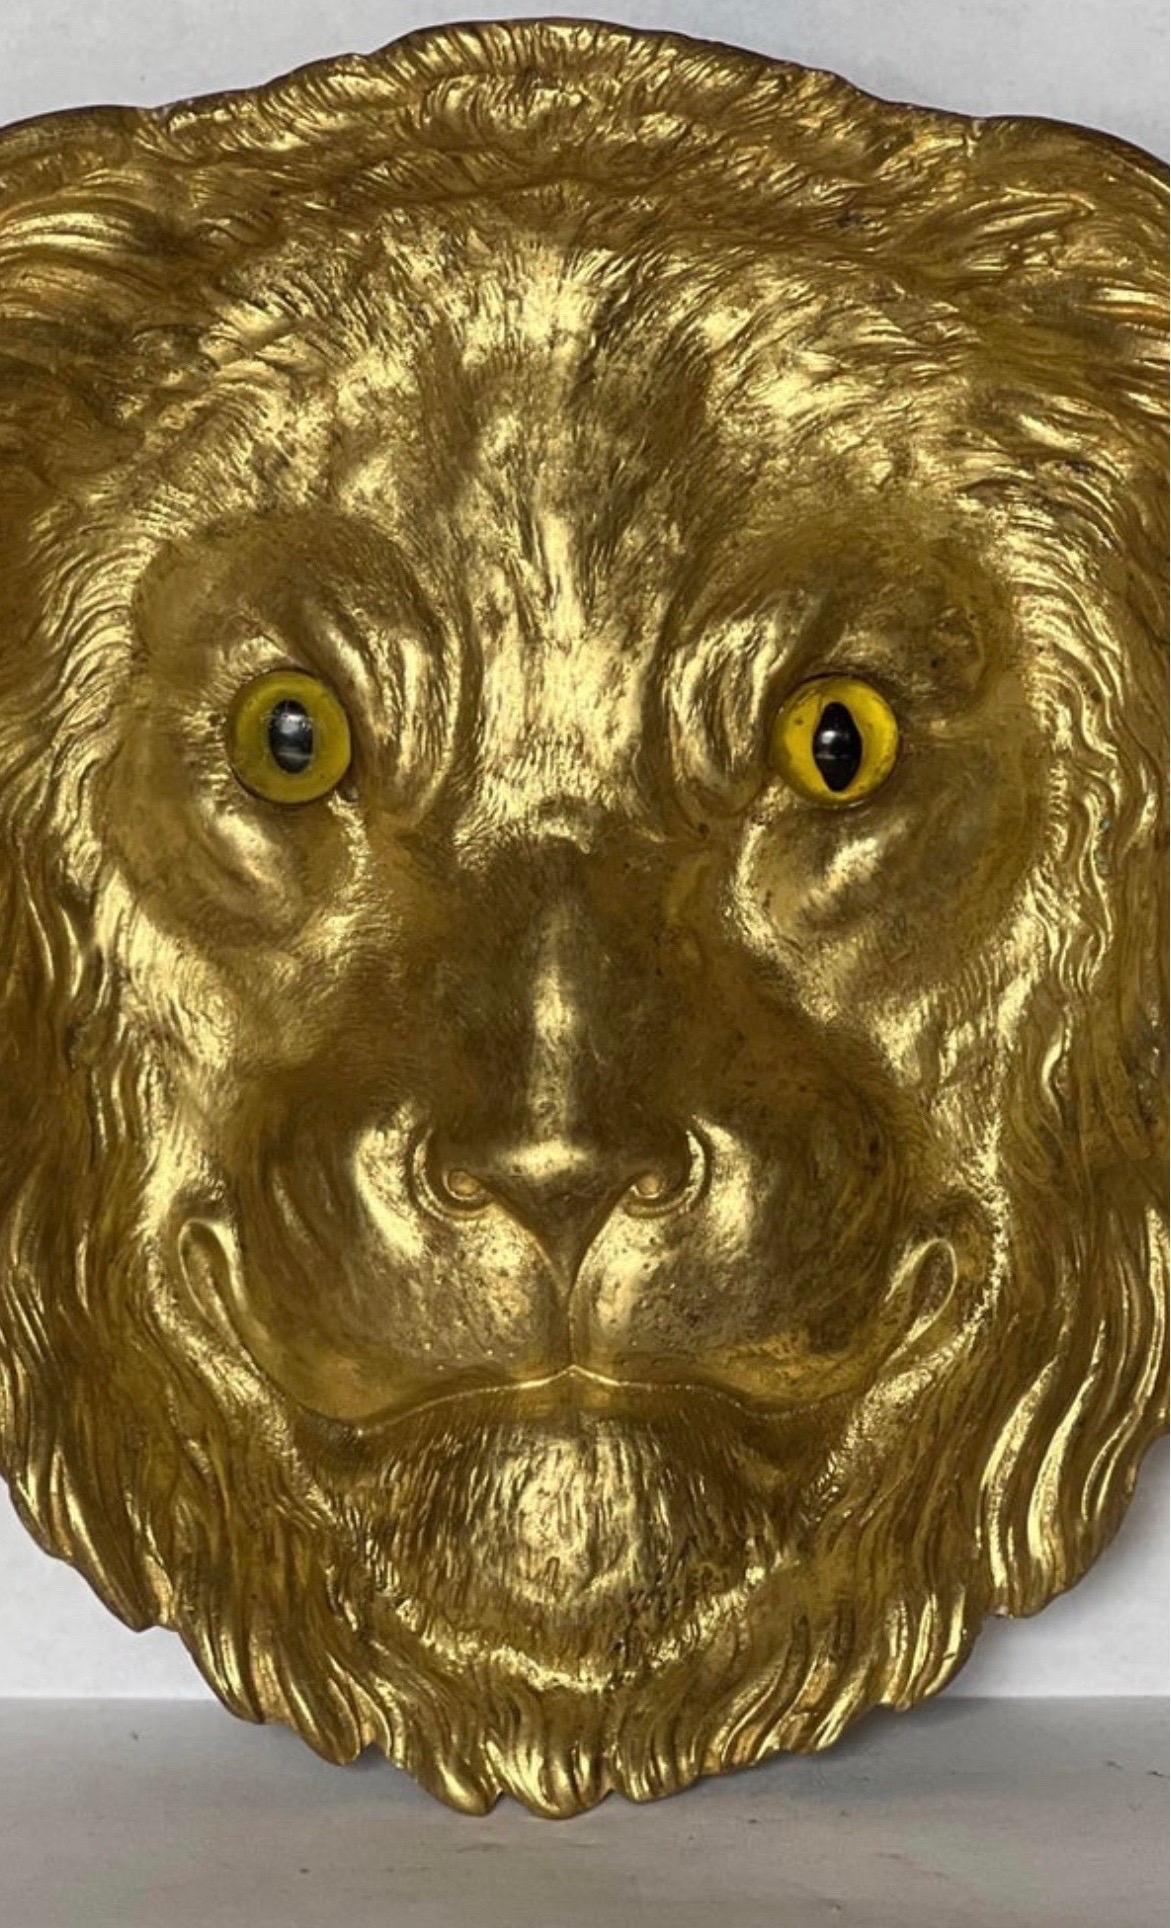 20th Century Antique French Gilt Bronze Lion Head Form Ashtray / Catchall with Glass Eyes For Sale